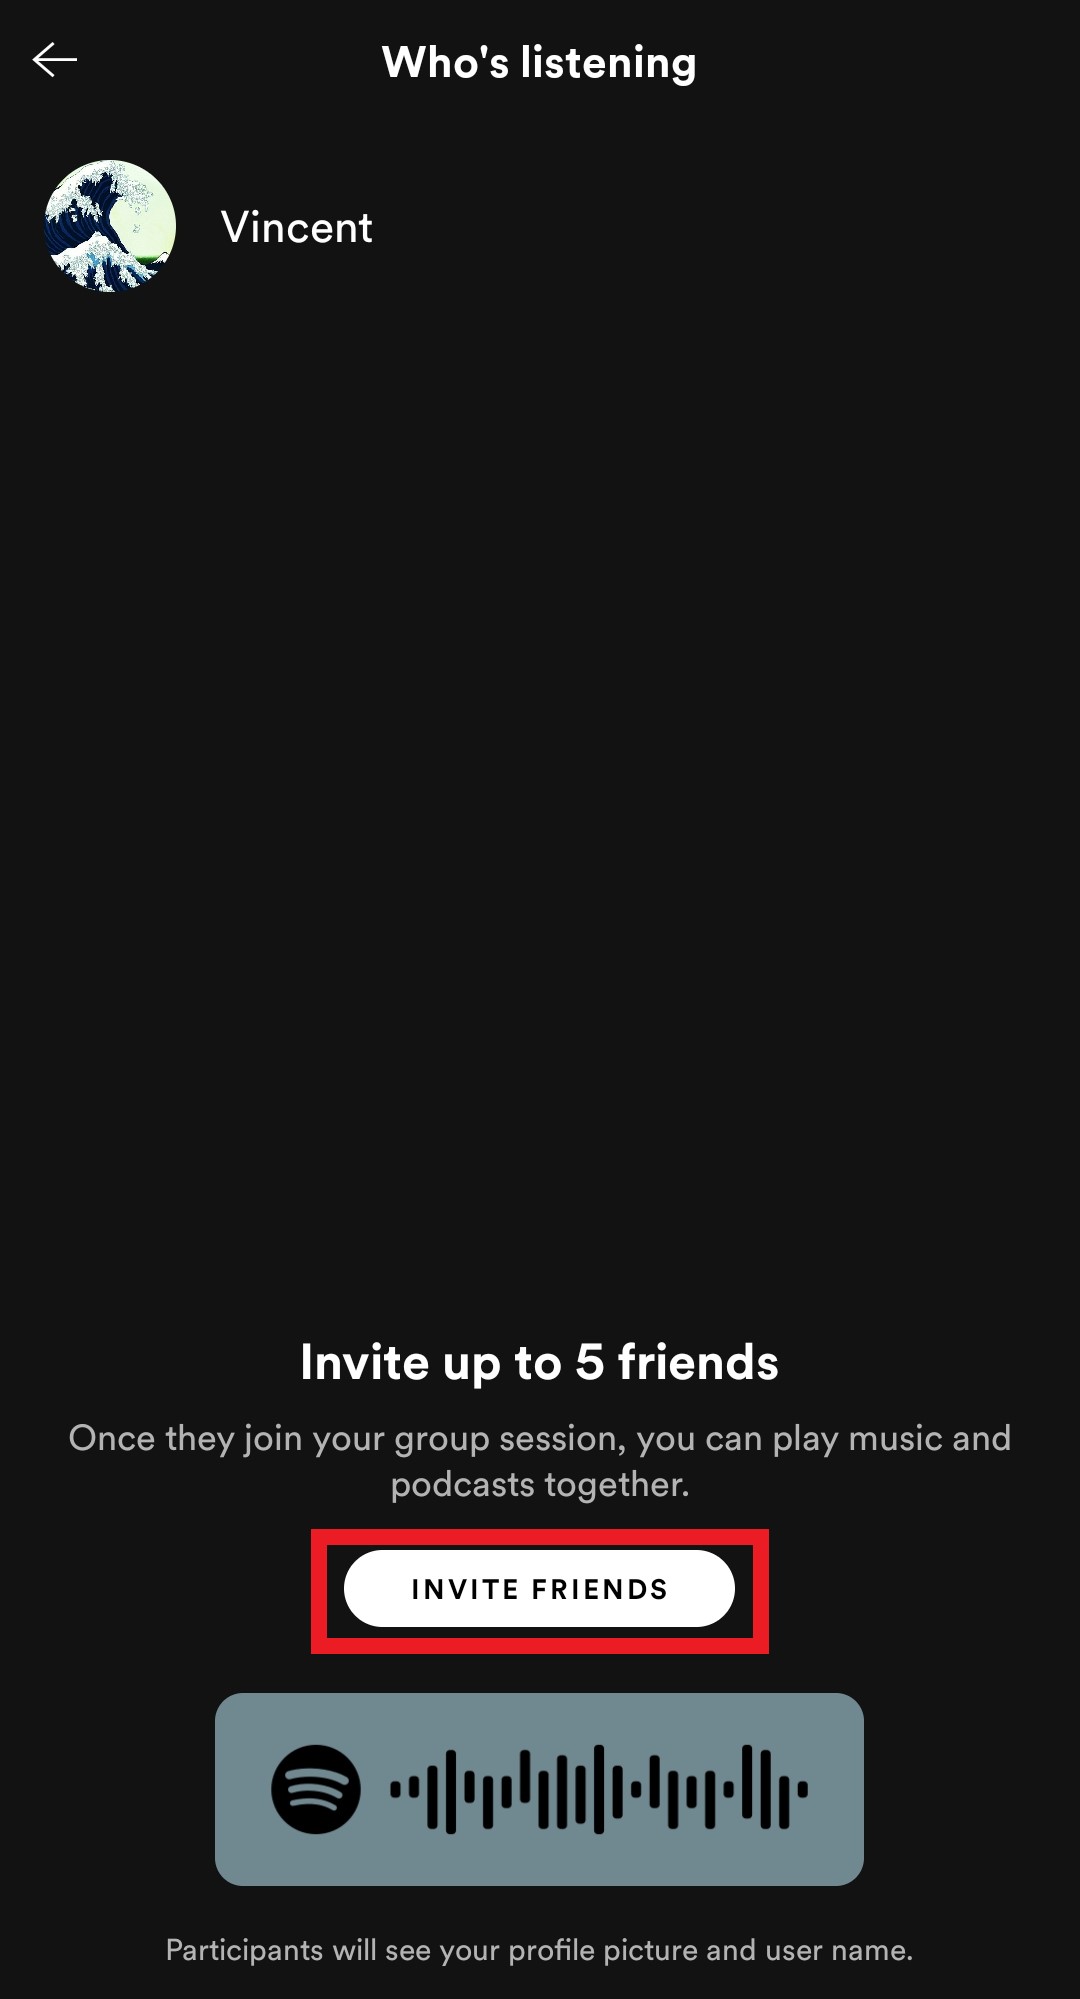 spotify group session invite friends